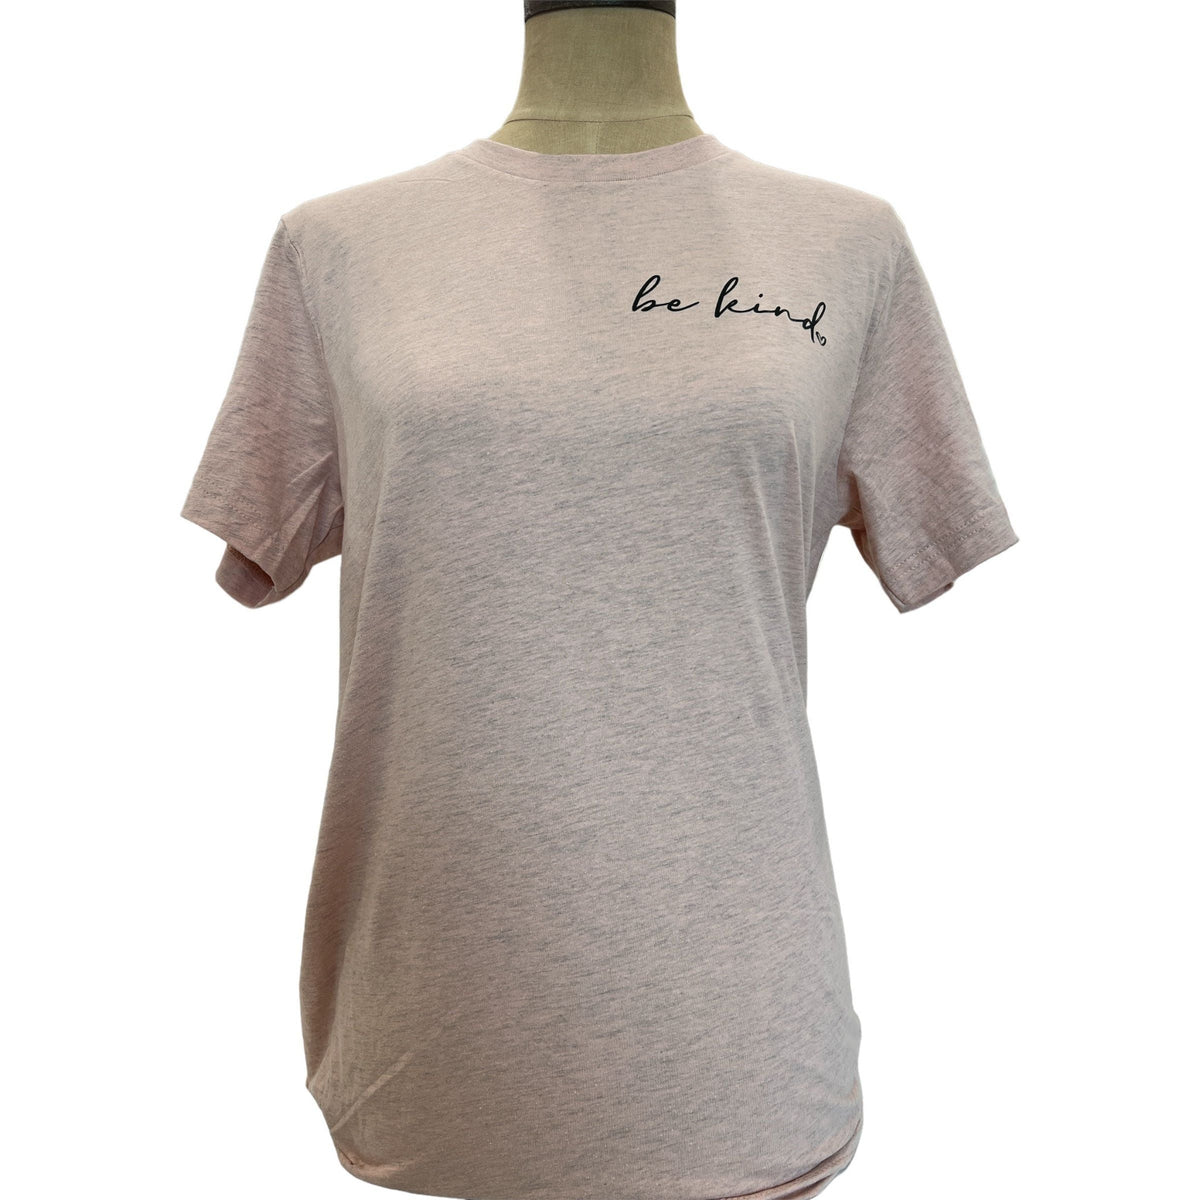 Be Kind: "The world is a better place with you in it" tan adult t-shirt. 